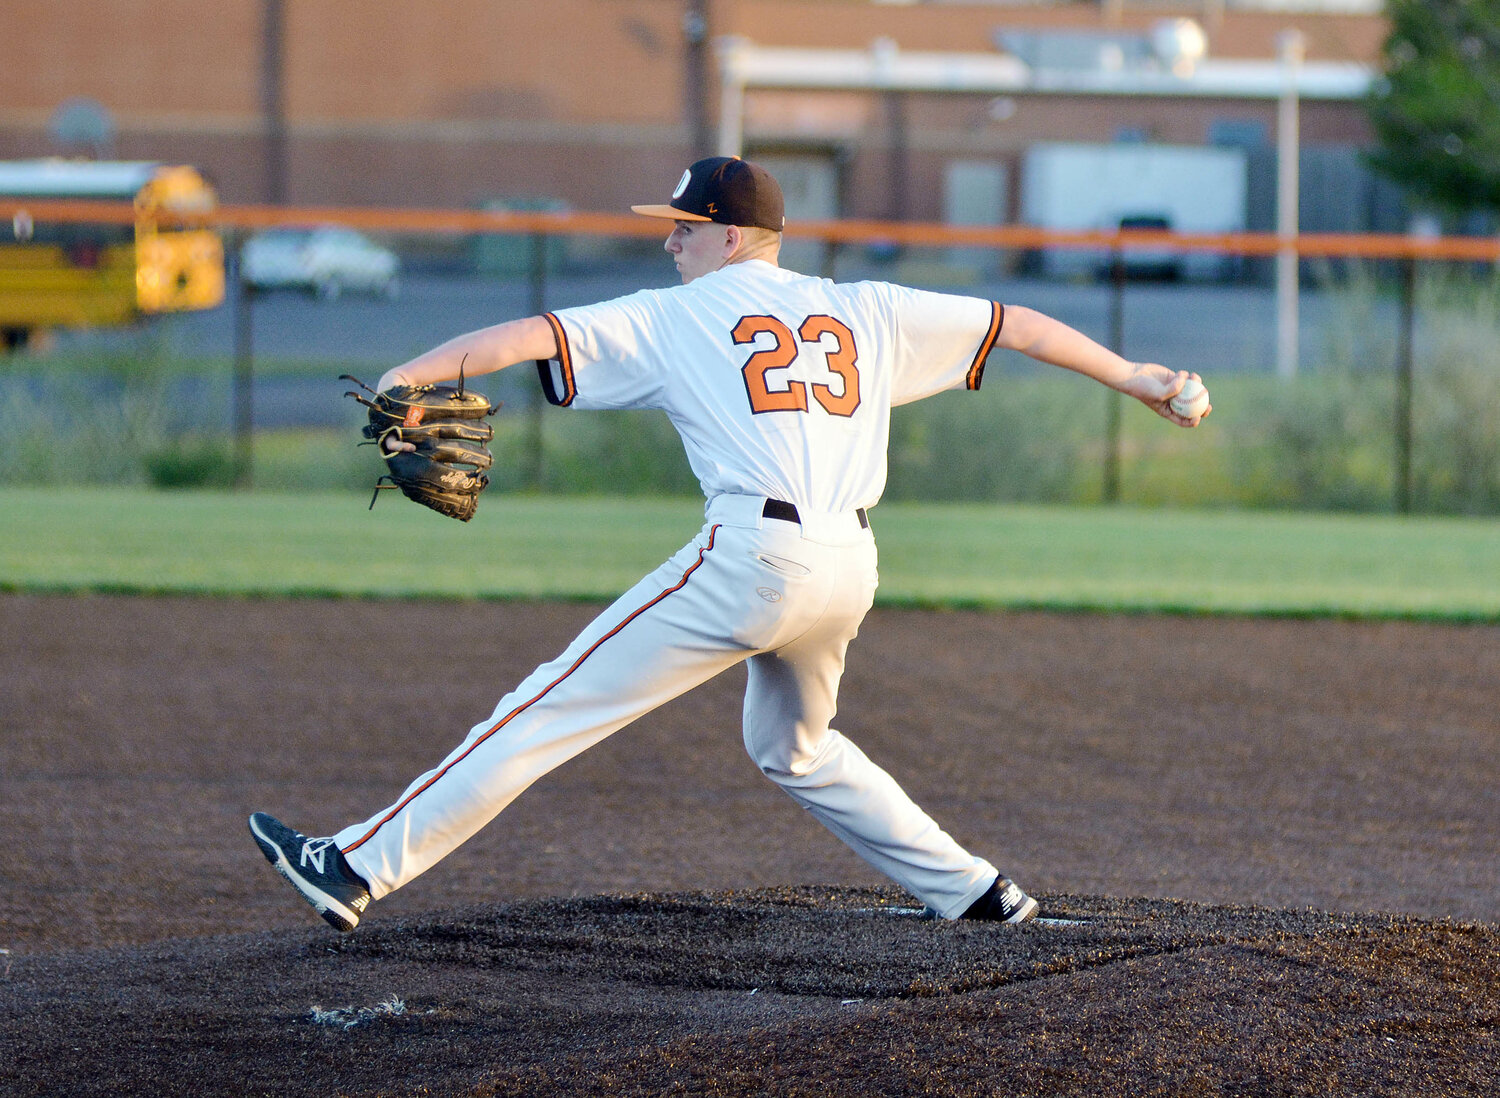 Chase Weirich starts into his wind up while pitching for Owensville’s Dutchmen during earlier home action at OHS Field against St. James. Owensville snapped a 15-game losing streak following a 17-3 win on the road at New Haven Friday night. Steven Kemp’s Dutchmen hosted Vienna last night (Tuesday) and is scheduled to host Linn this Friday at 5 p.m.